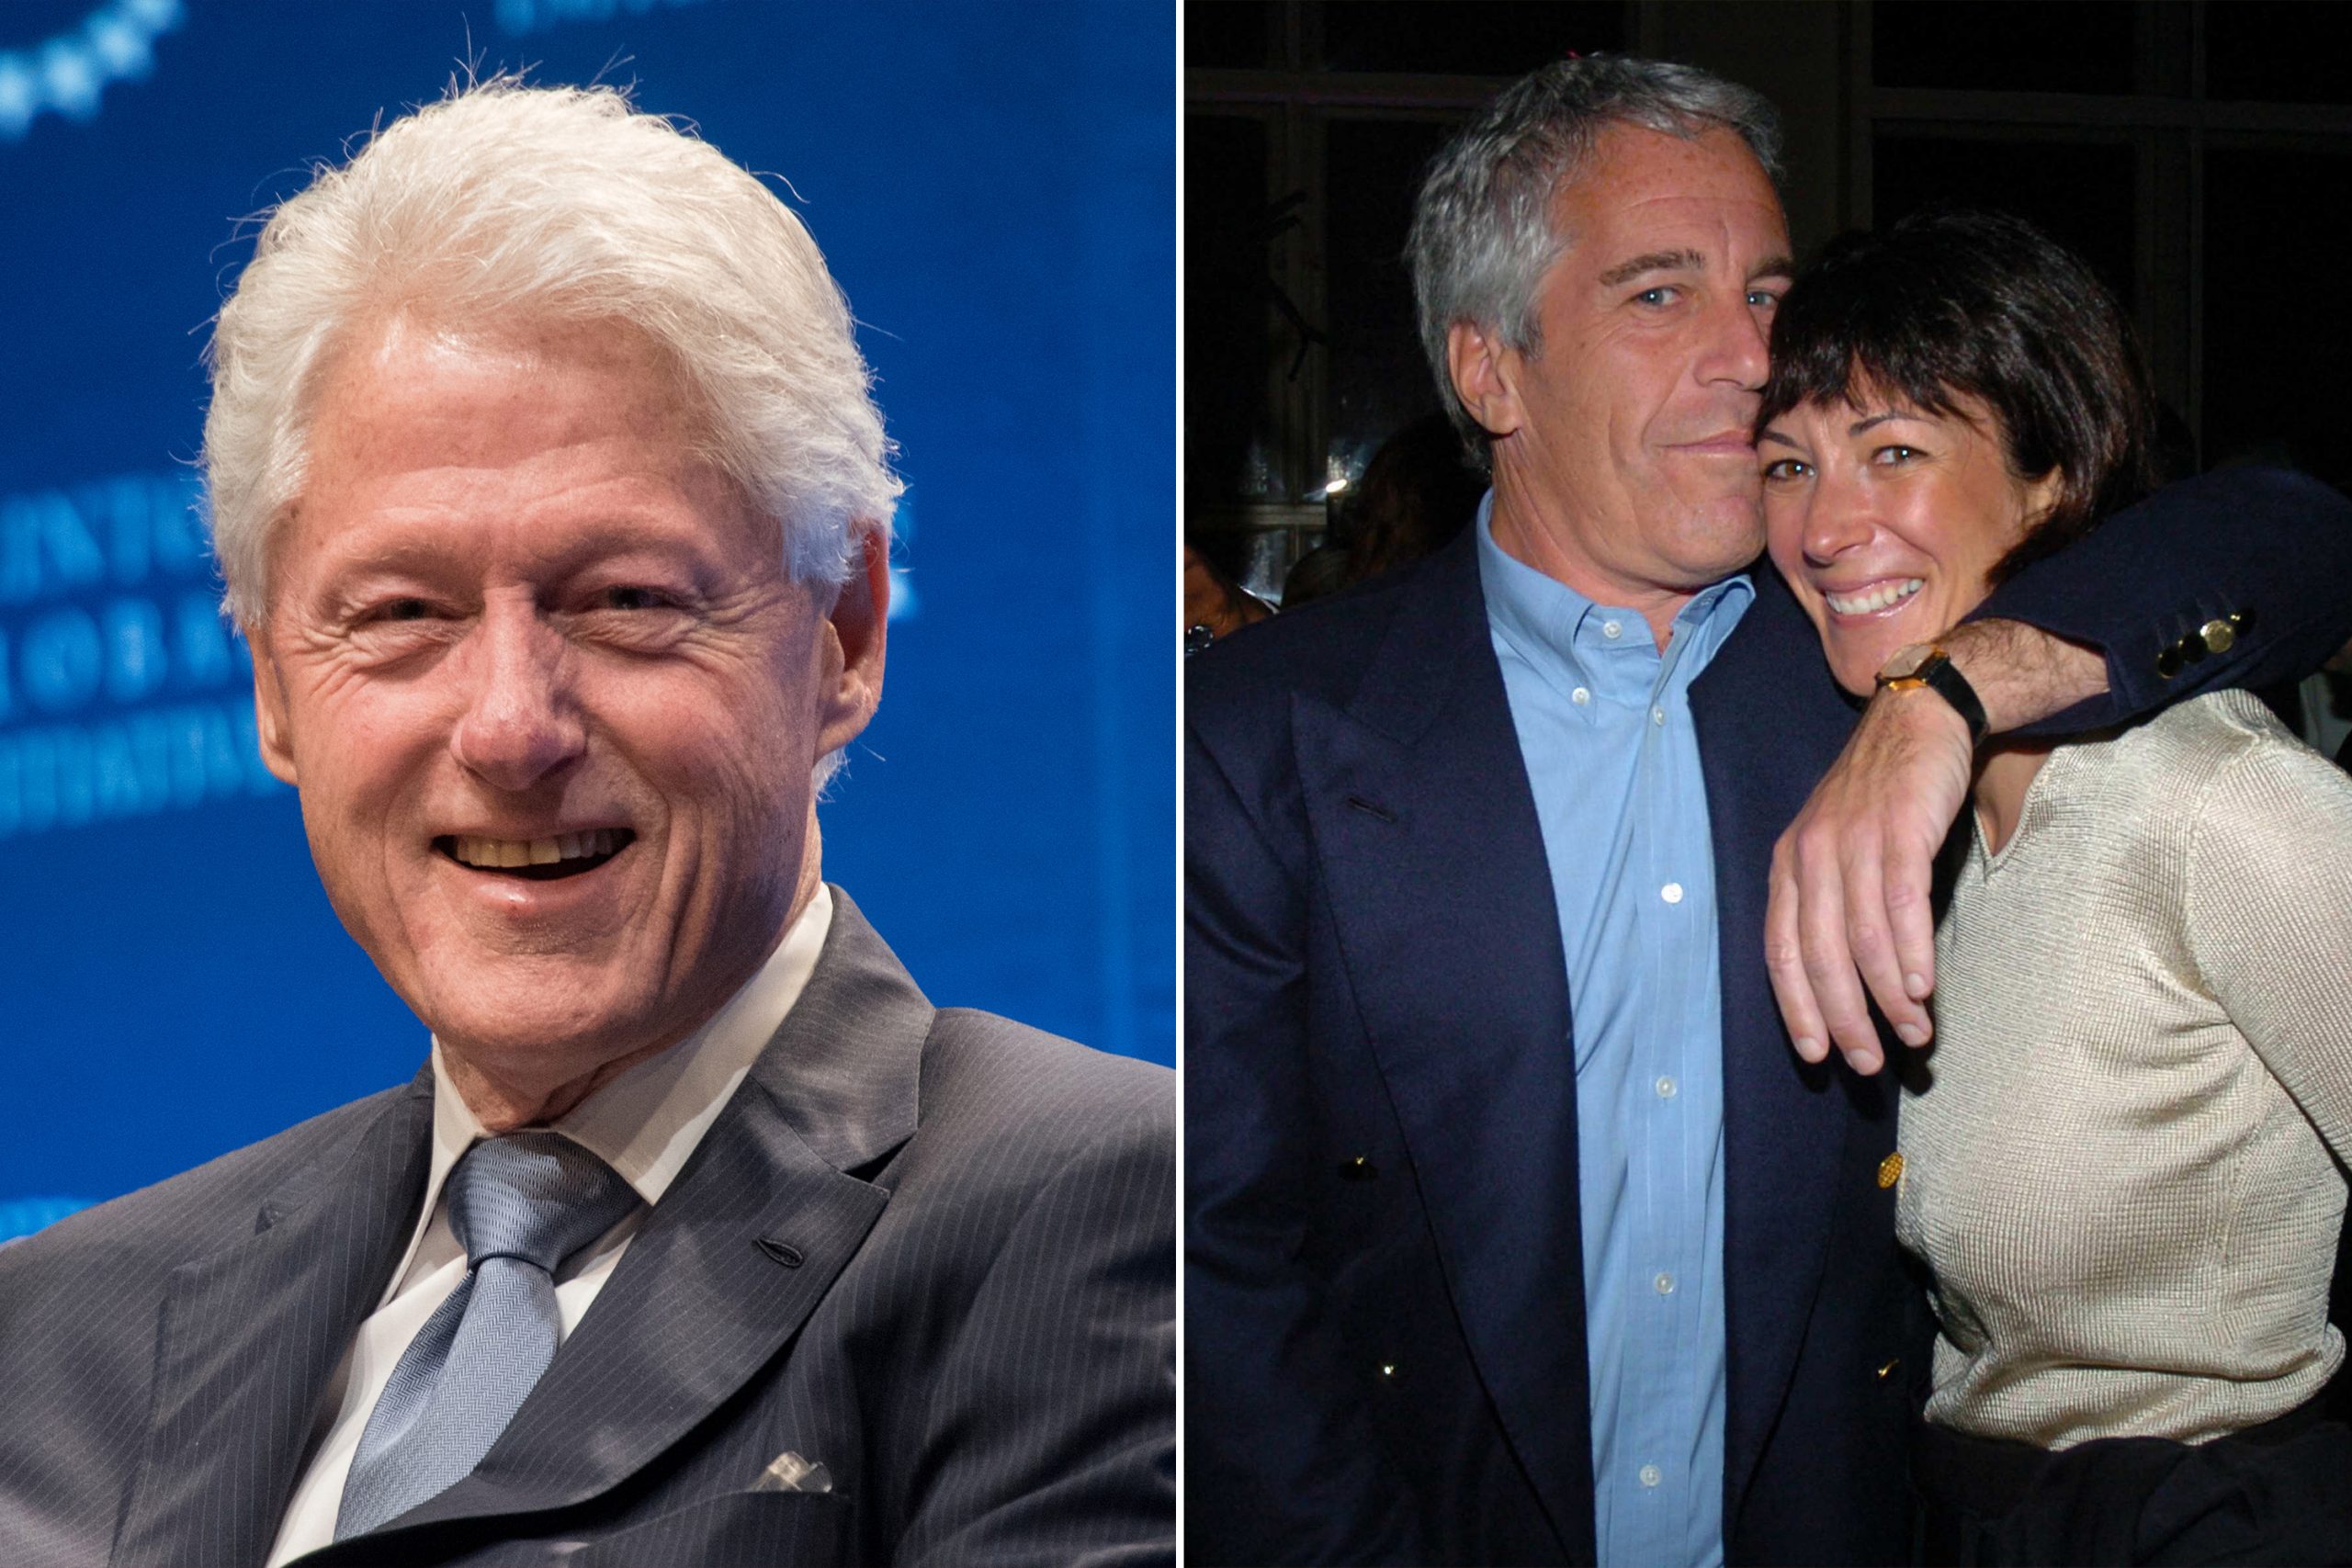 Jeffrey Epstein hosted Bill Clinton on private island: court docs